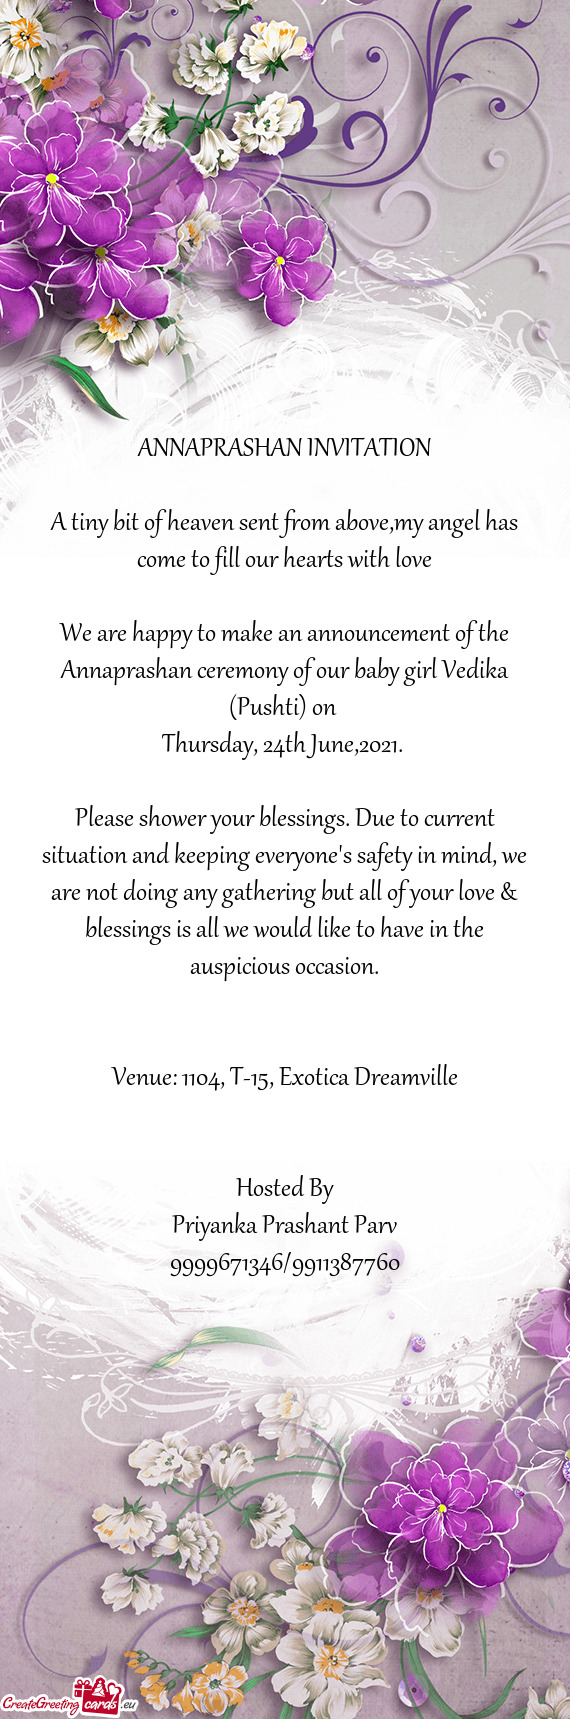 We are happy to make an announcement of the Annaprashan ceremony of our baby girl Vedika (Pushti) on